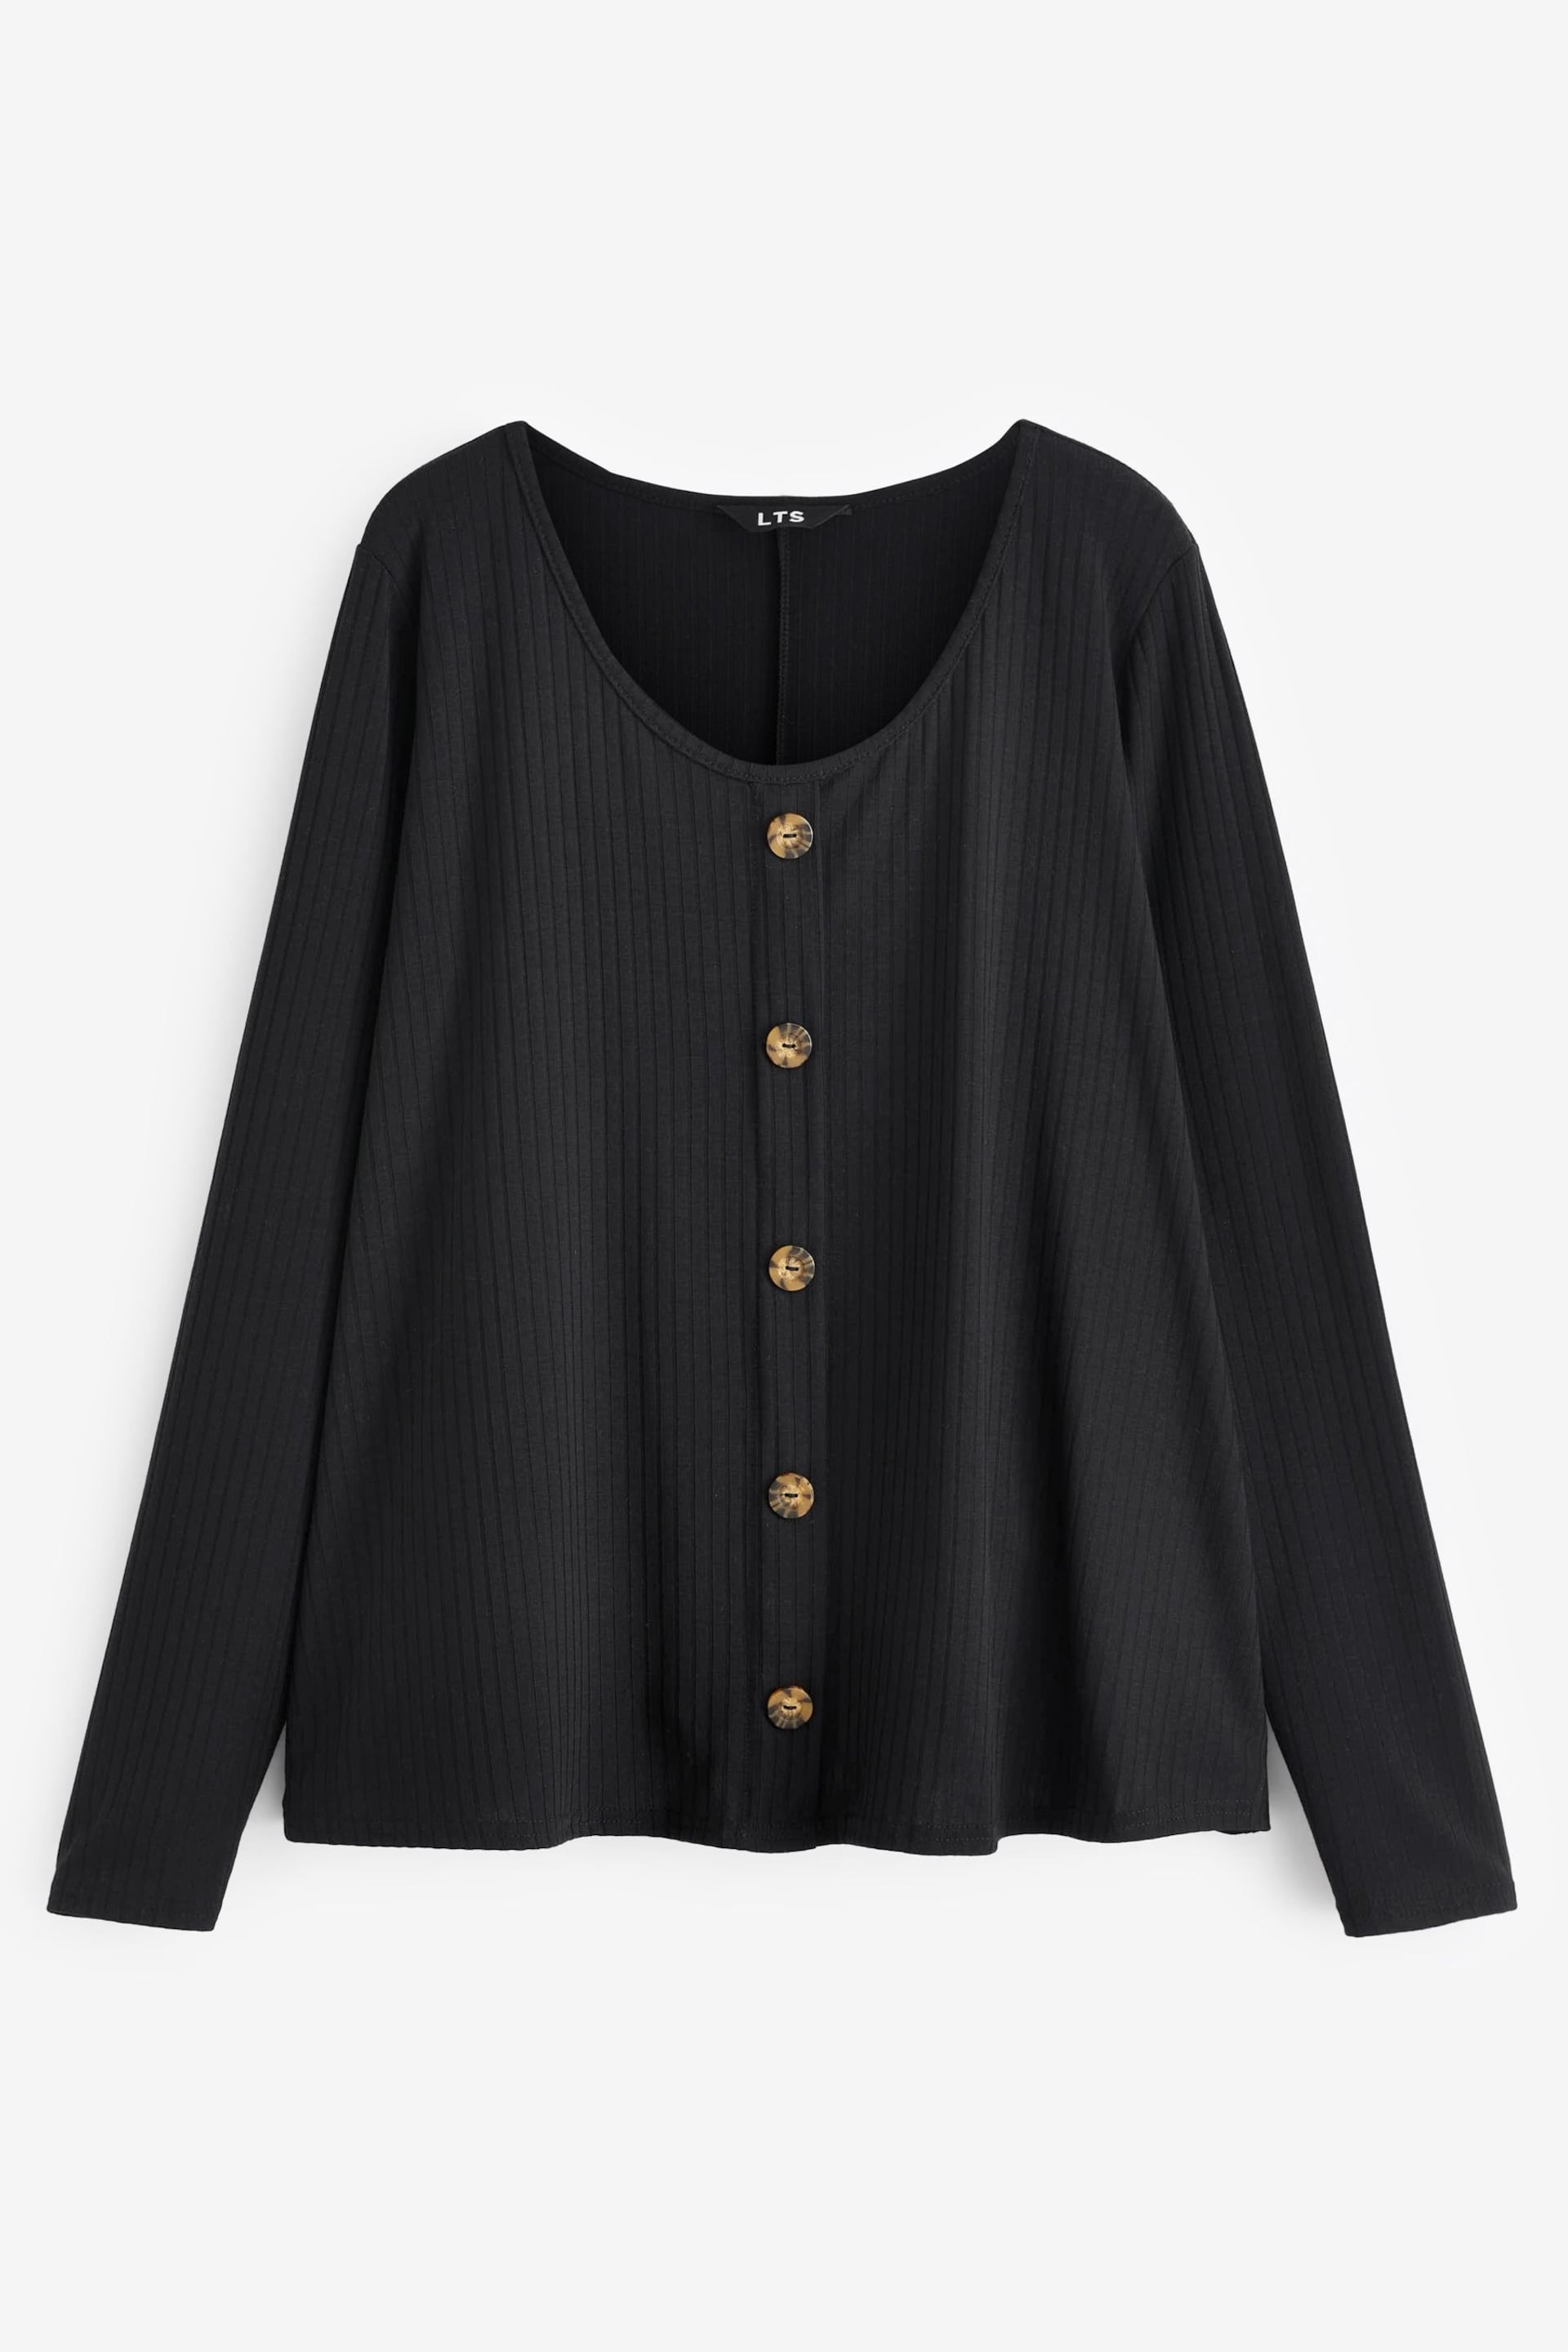 Long Tall Sally Black Scoop Long Sleeve Button Top - Image 5 of 5